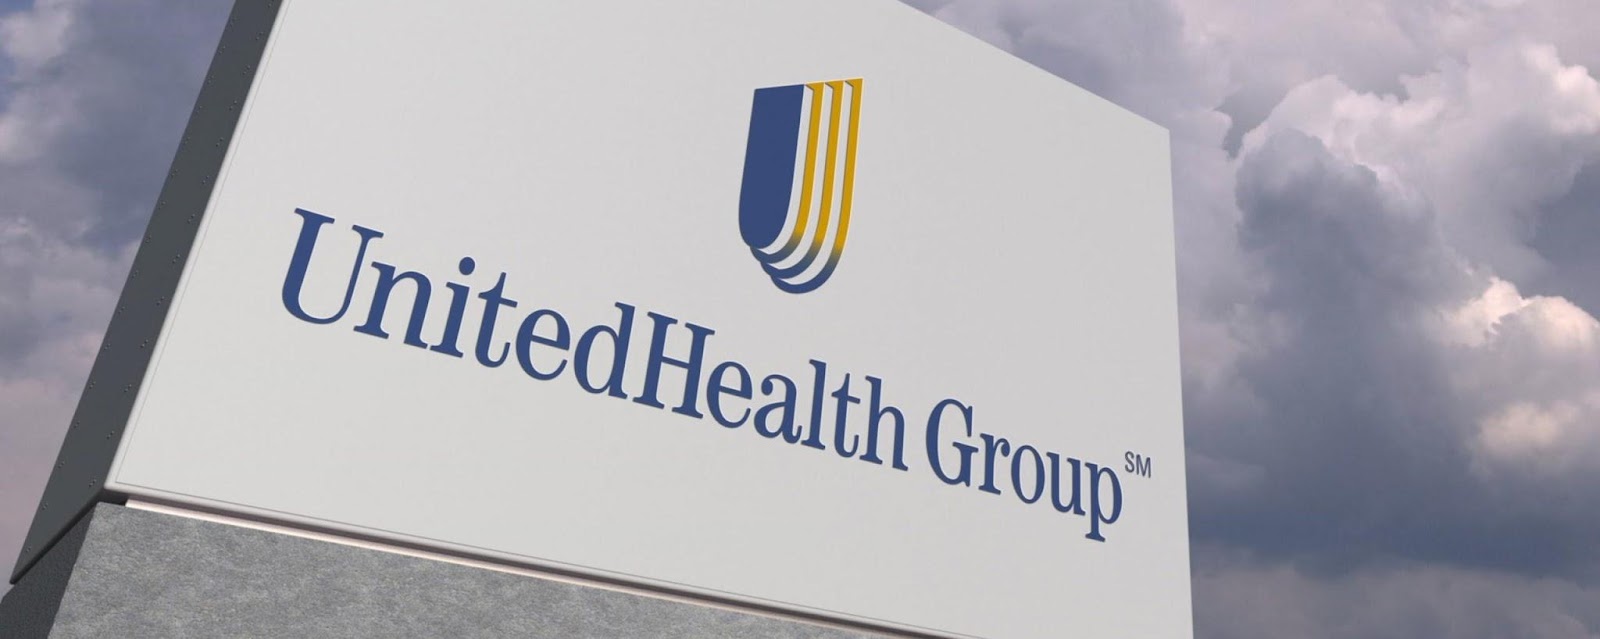 UnitedHealth Group is renowned for its presence among the top healthcare analytics companies